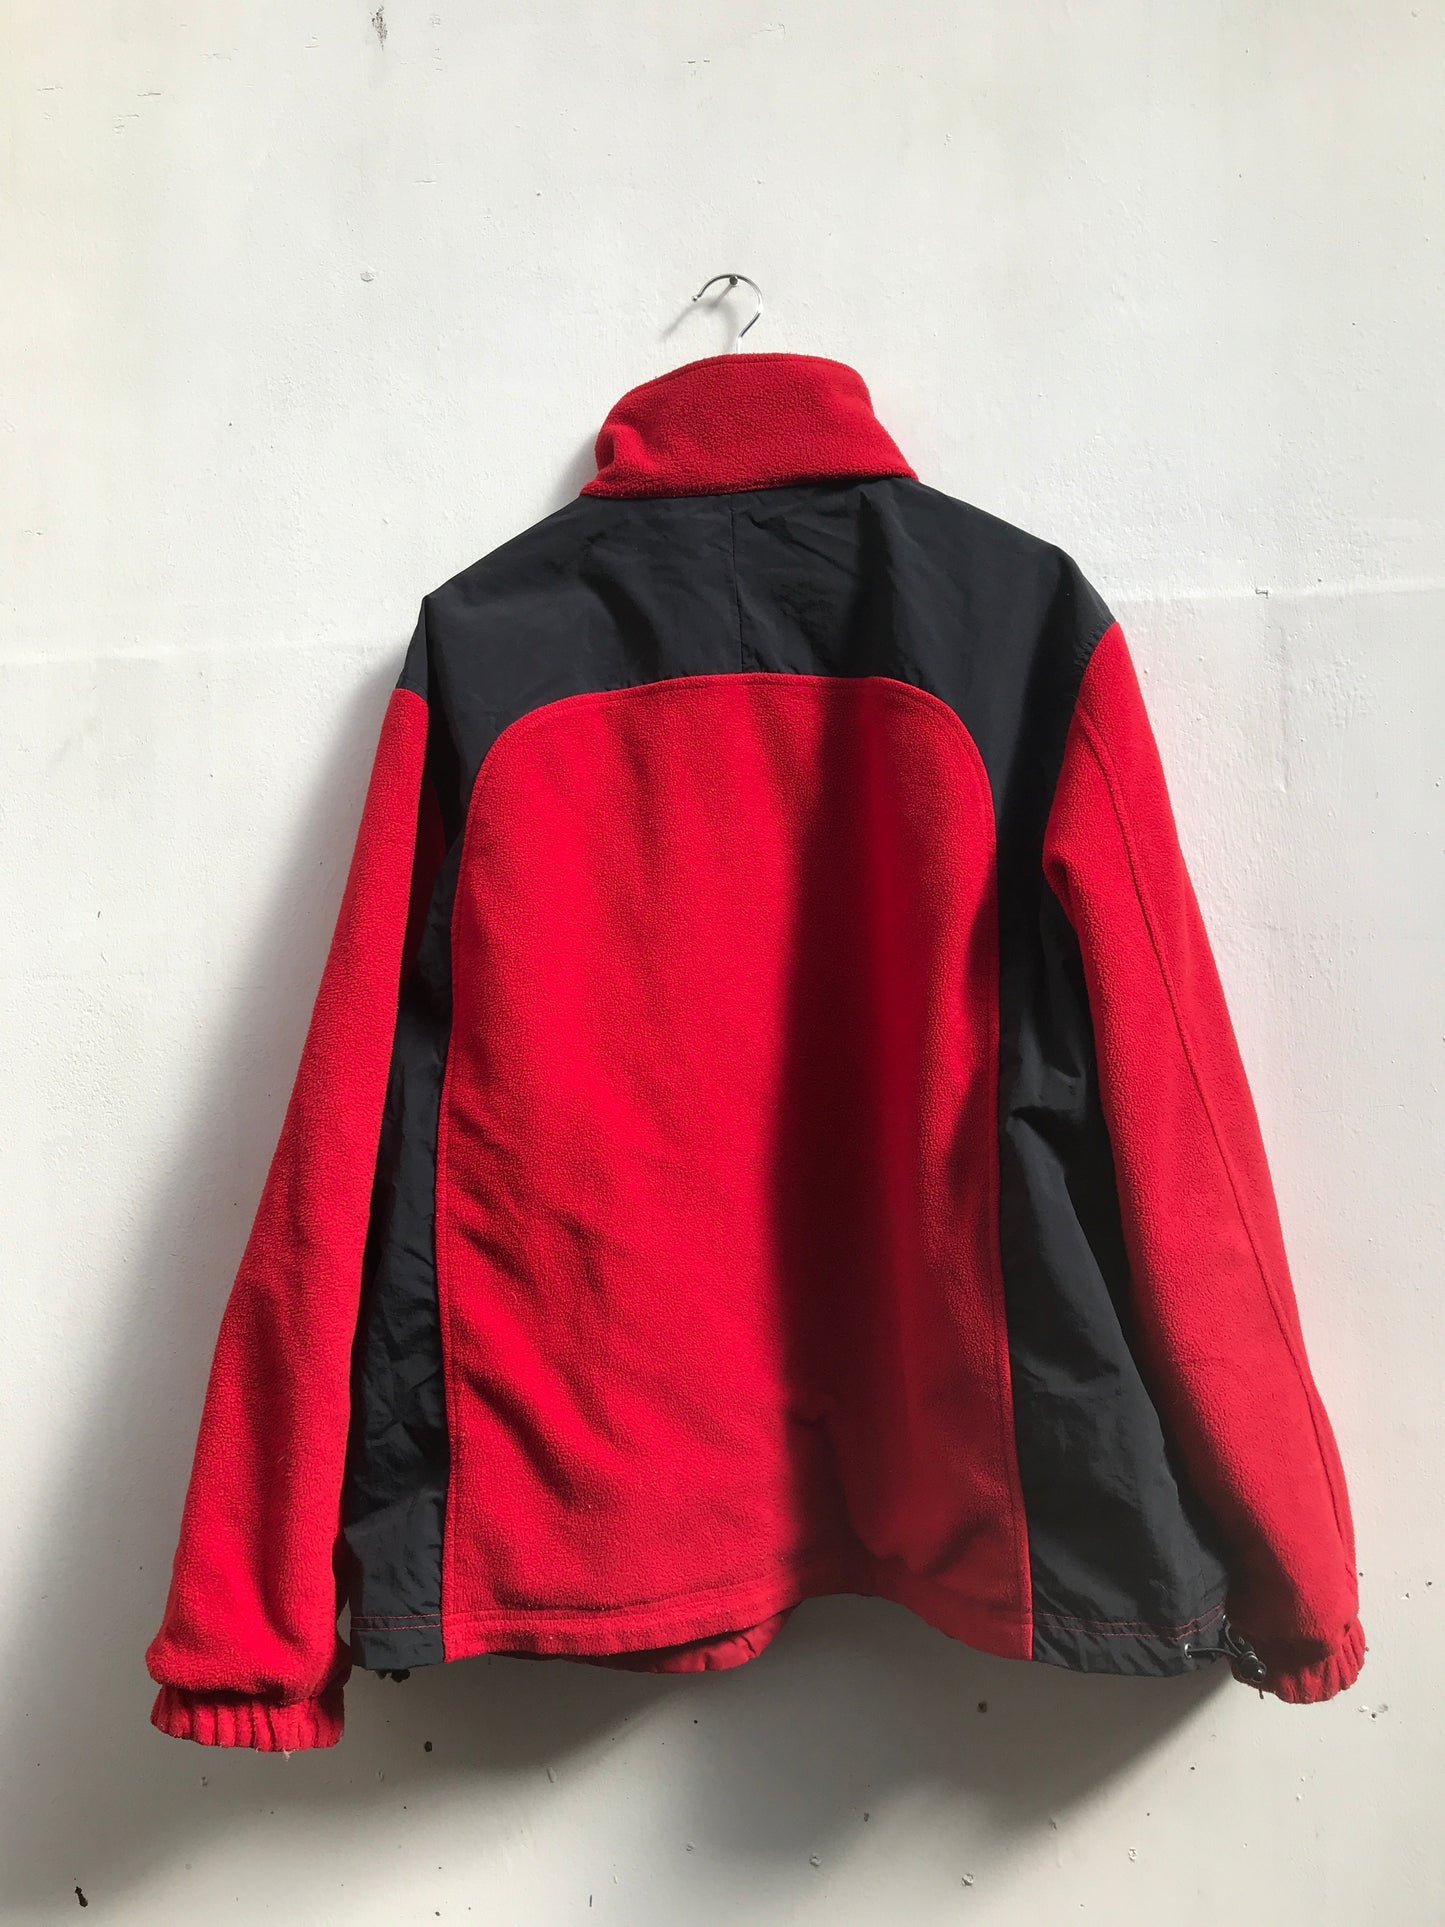 LL Bean Vintage Double View Jacket